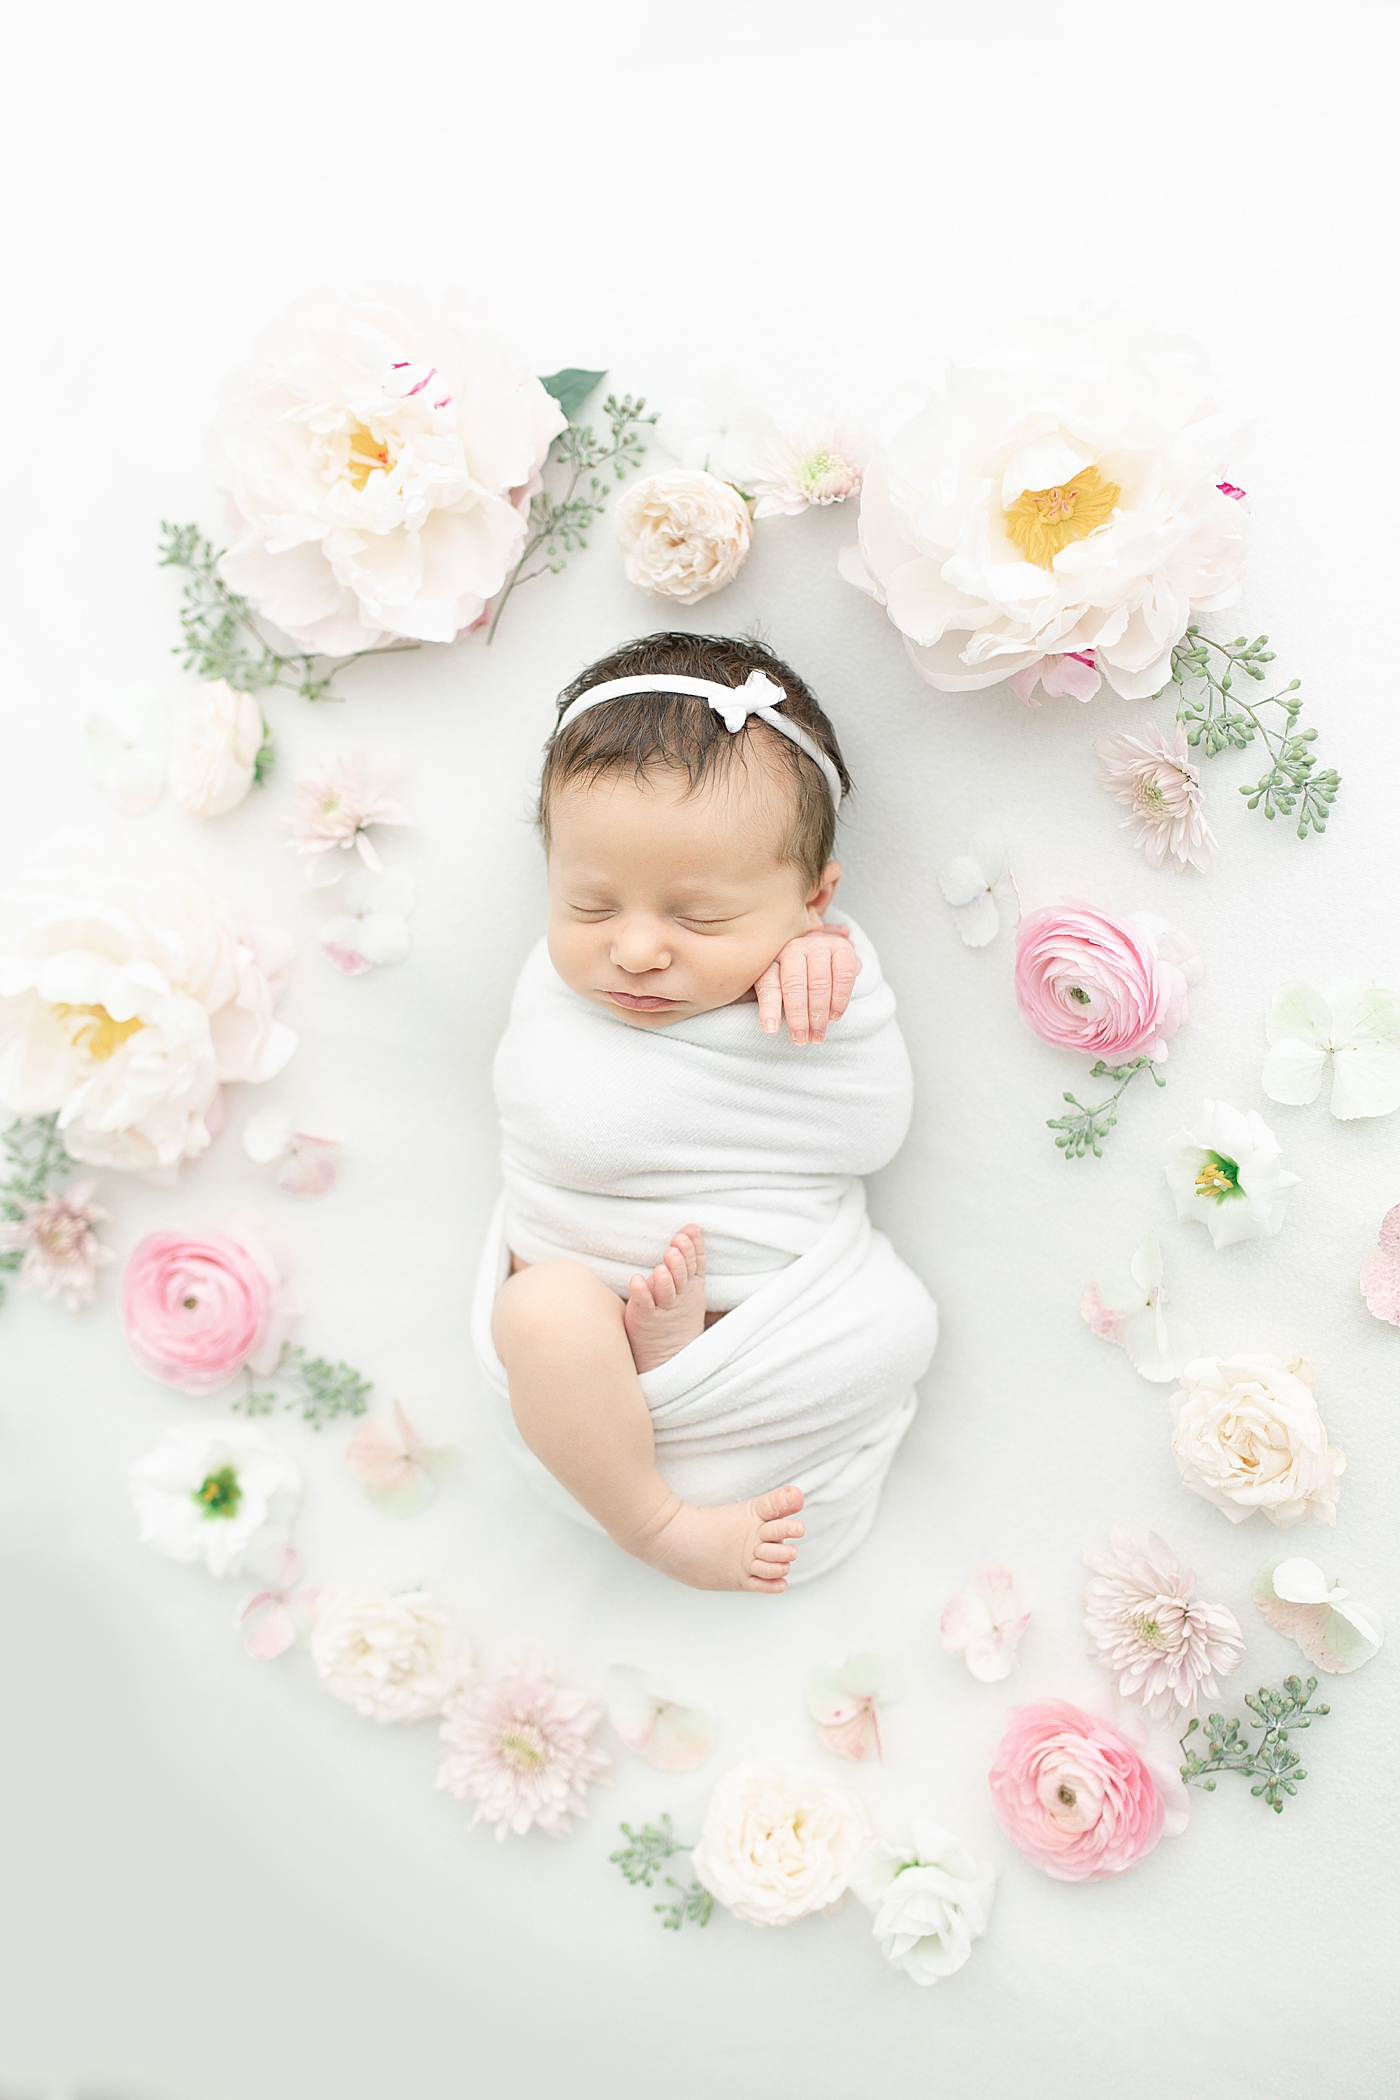 Newborn baby girl surrounded by flowers | Photo by Little Sunshine Photography 